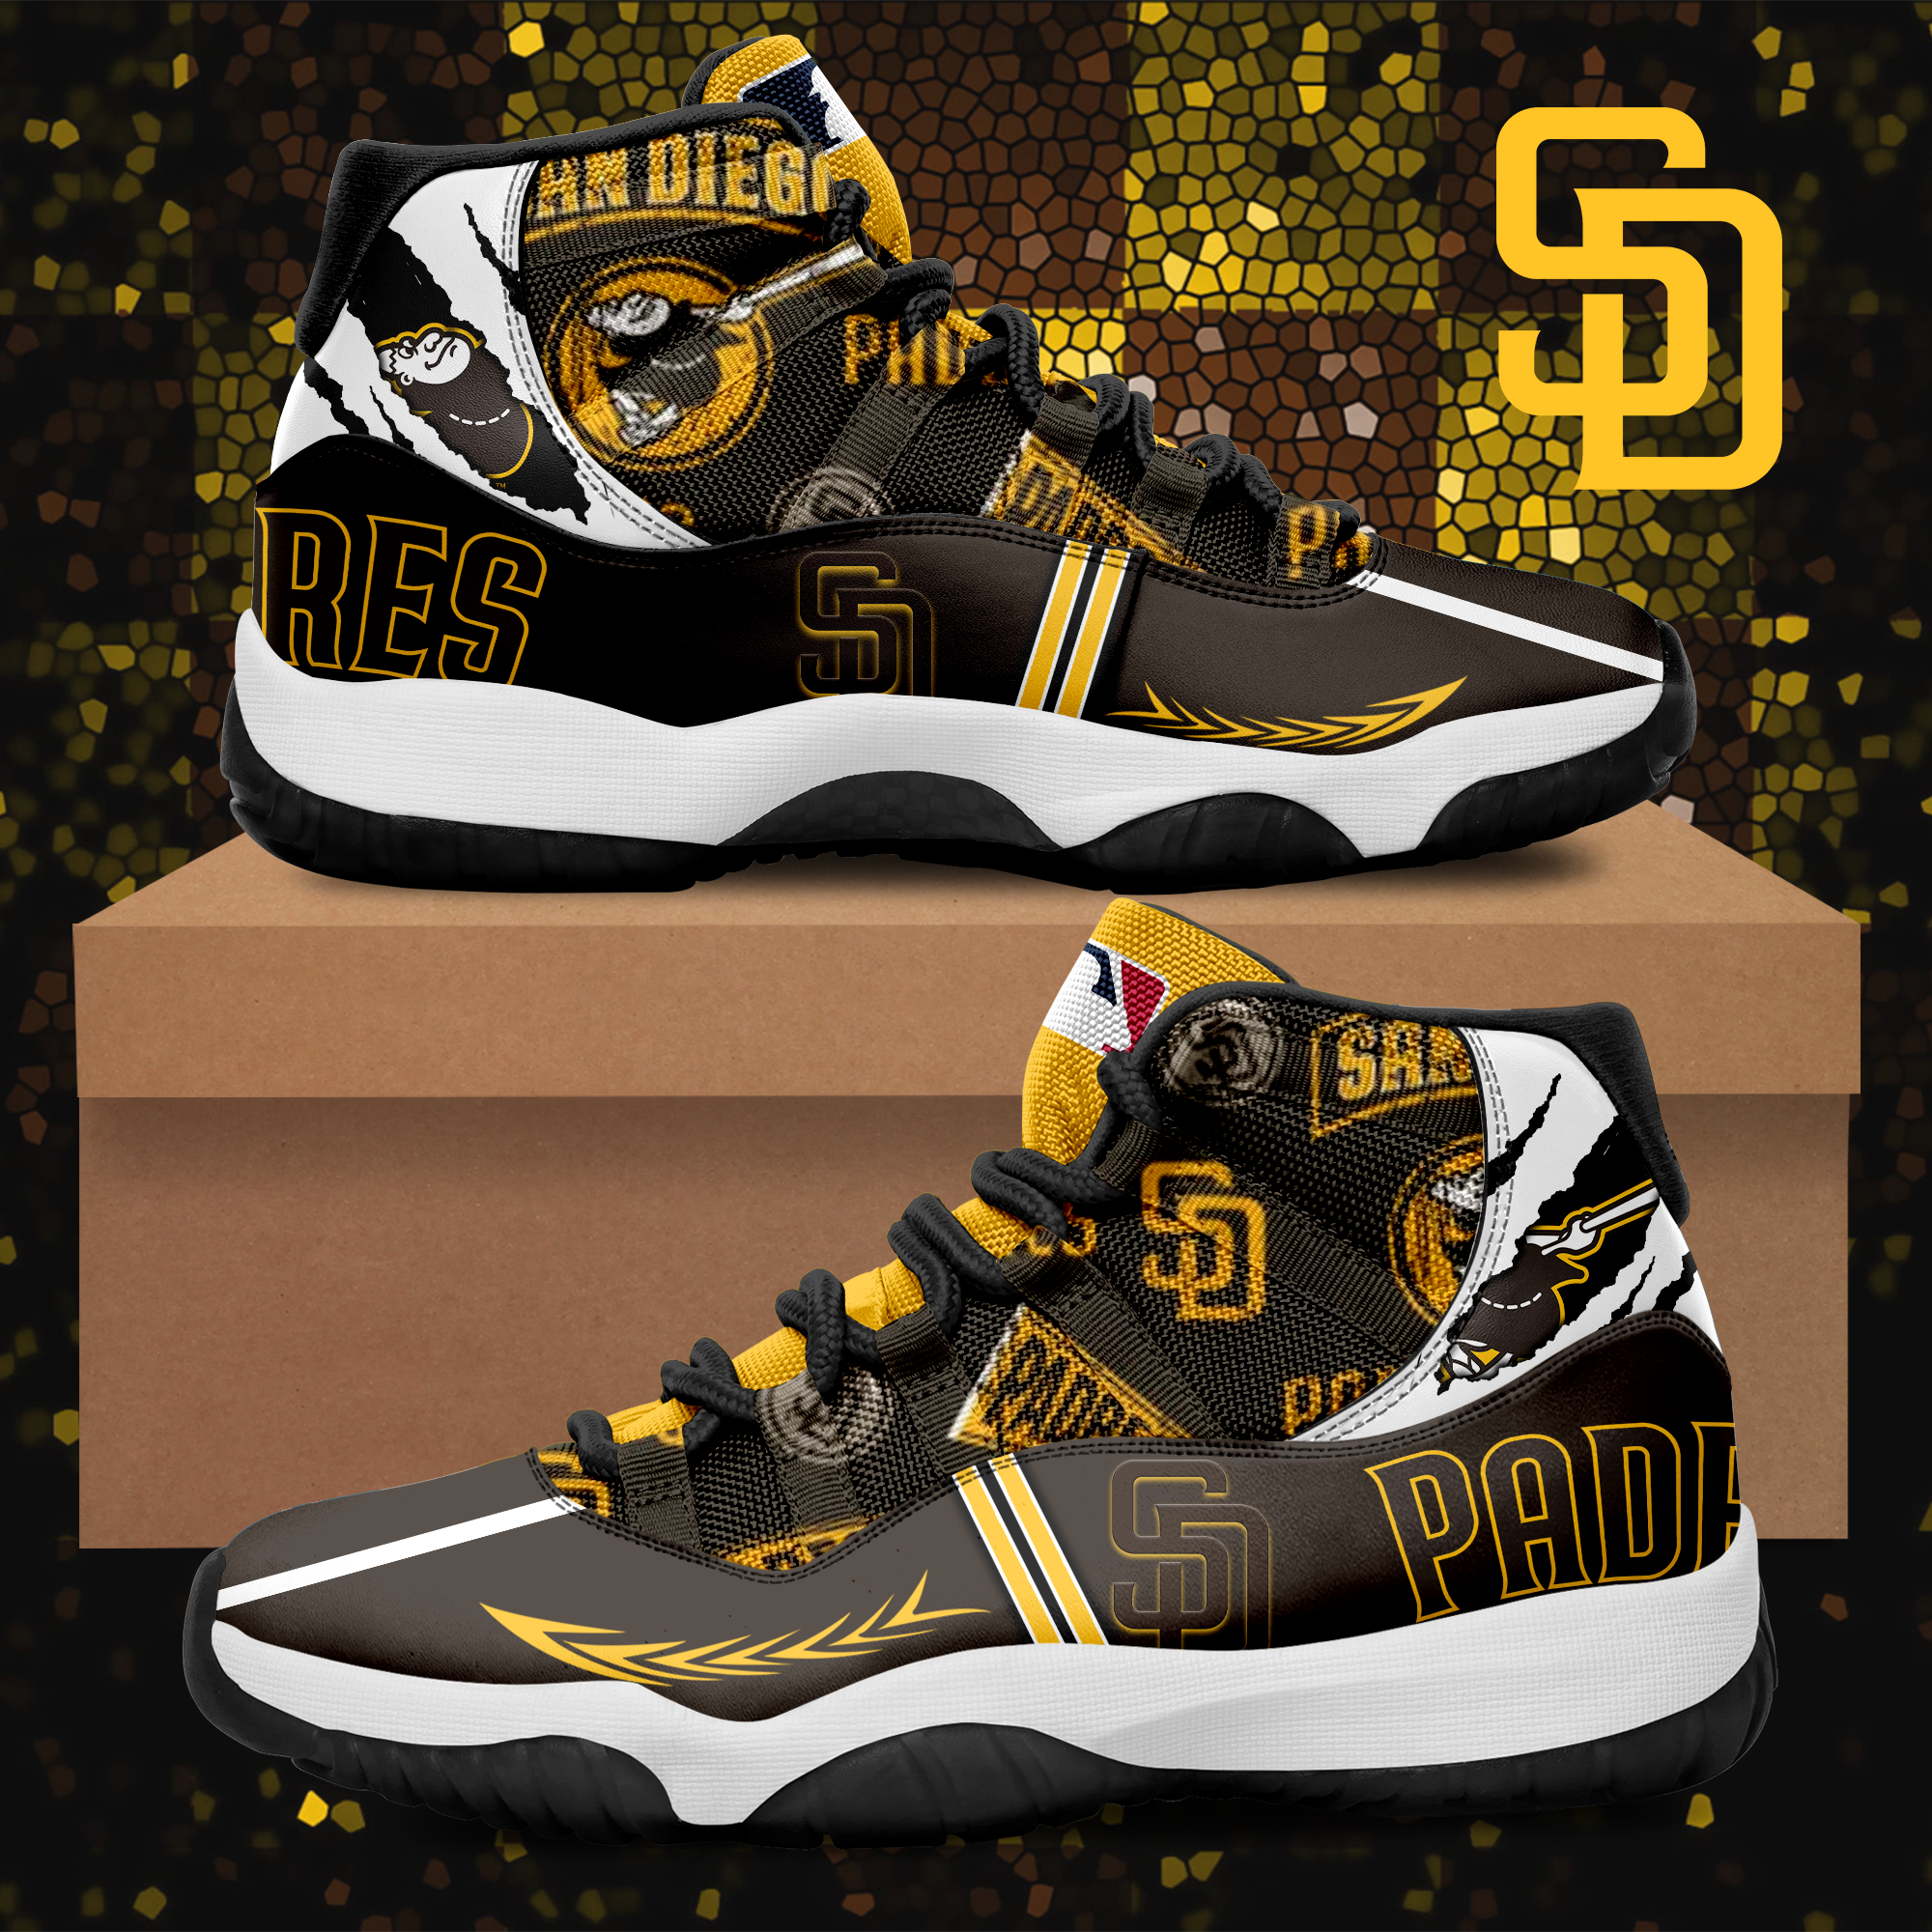 padres nike shoes